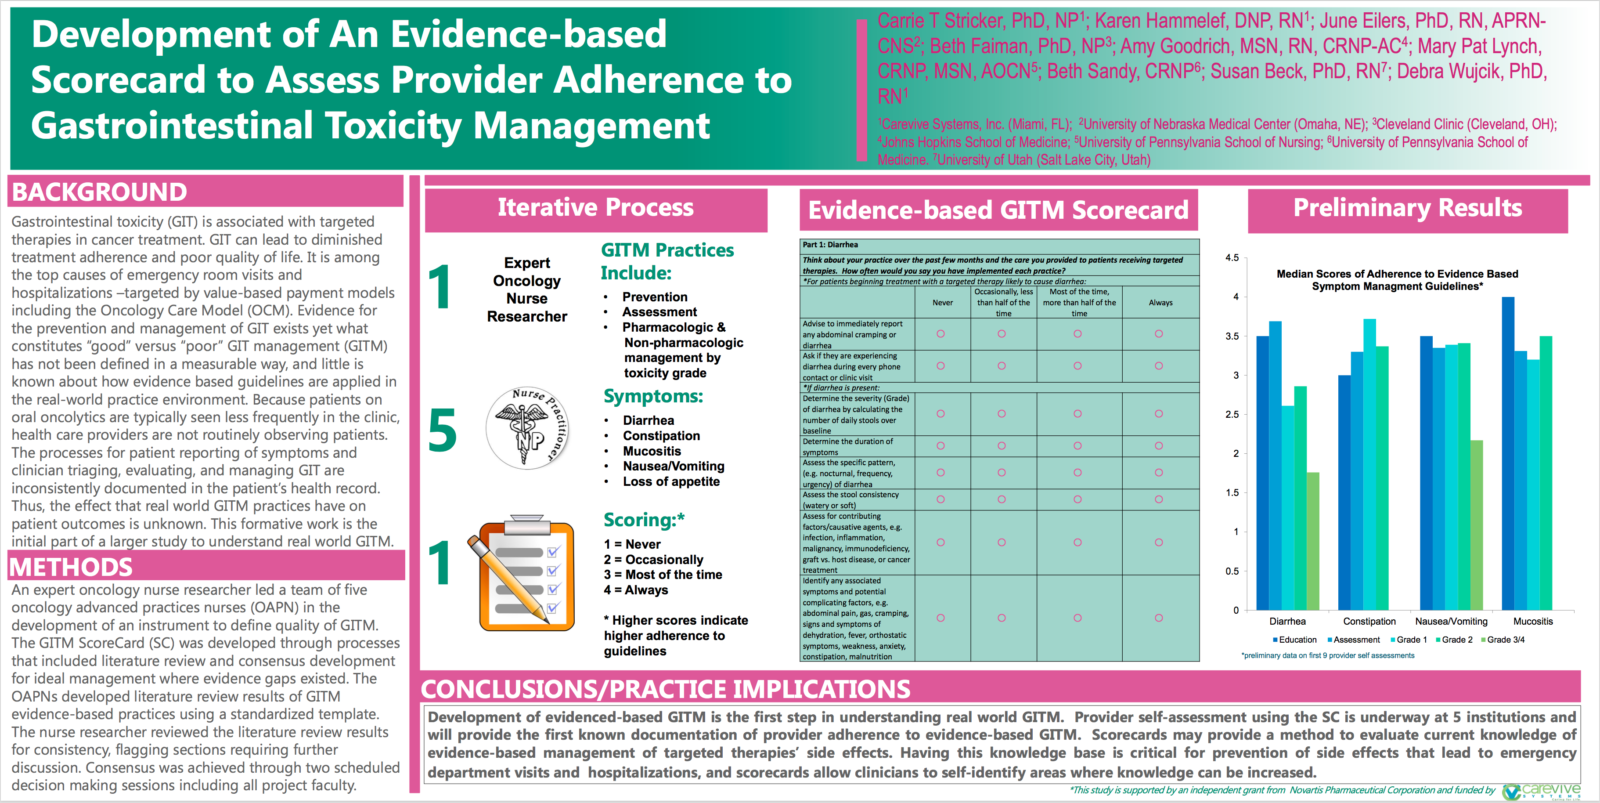 Development of An Evidence-based Scorecard to Assess Provider Adherence to Gastrointestinal Toxicity Management